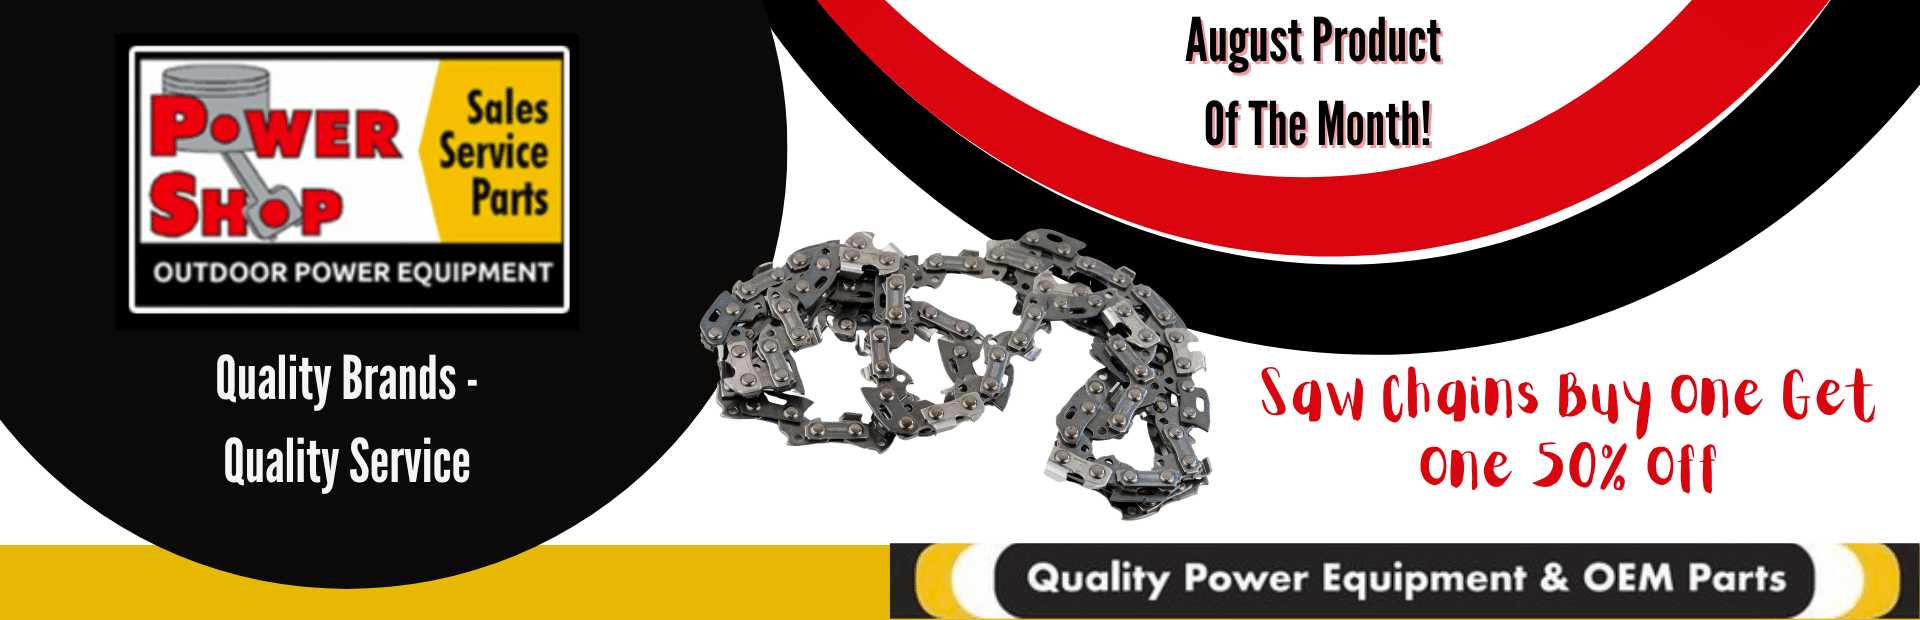 Power Shop Product of the month of August - Saw Chains Buy One Get One Half Off!